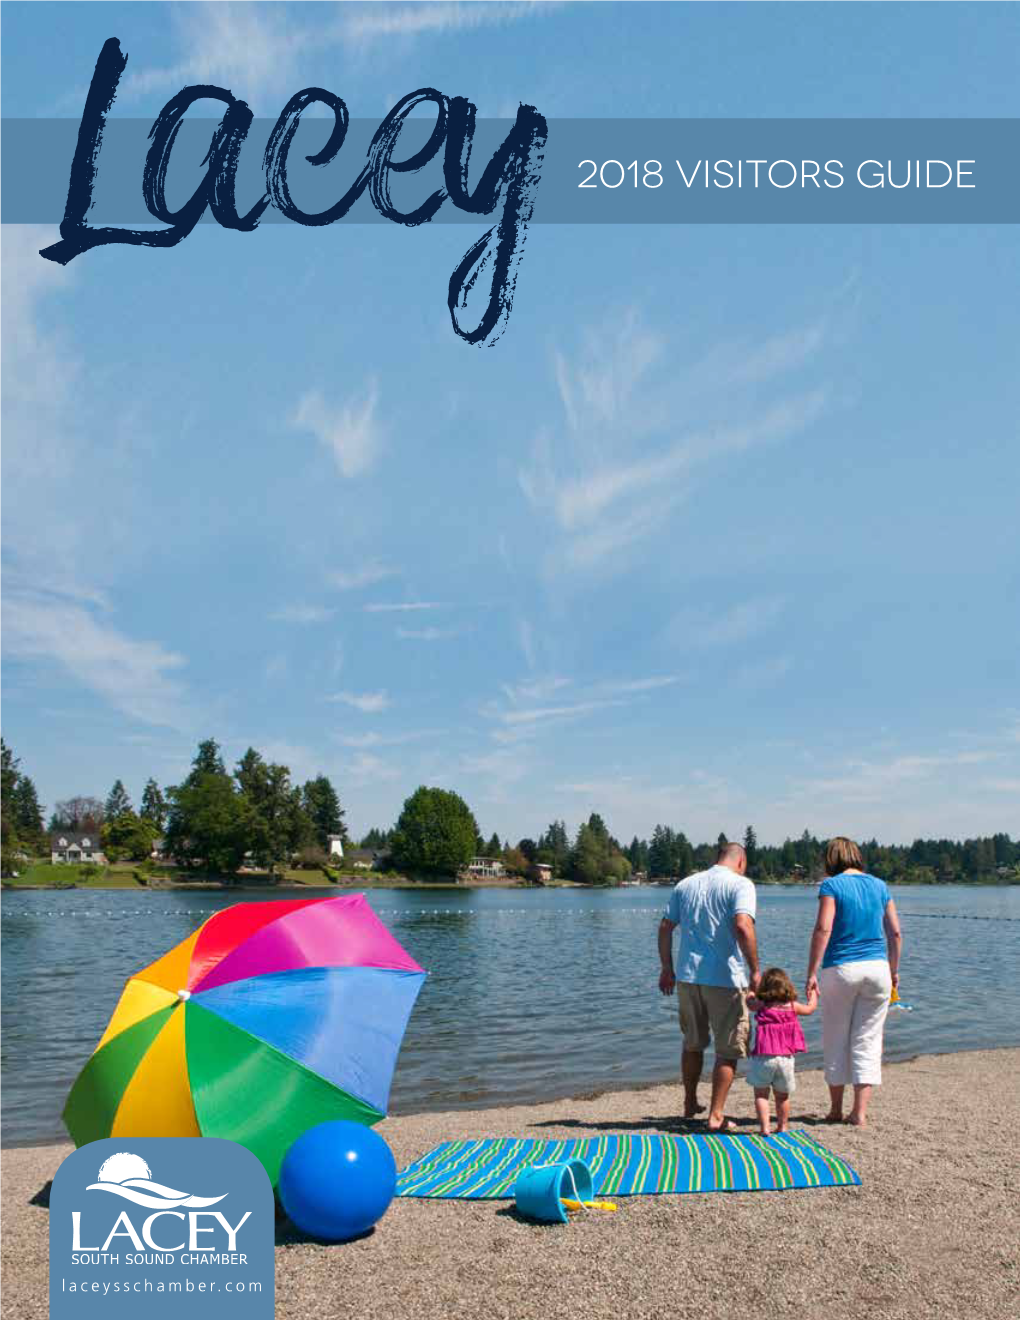 2018 Visitors Guide Lacey Fire District Three (LFD3) Provides Fire, Emergency Medical, and Rescue Services to the City of Lacey and Surrounding Unincorporated Areas